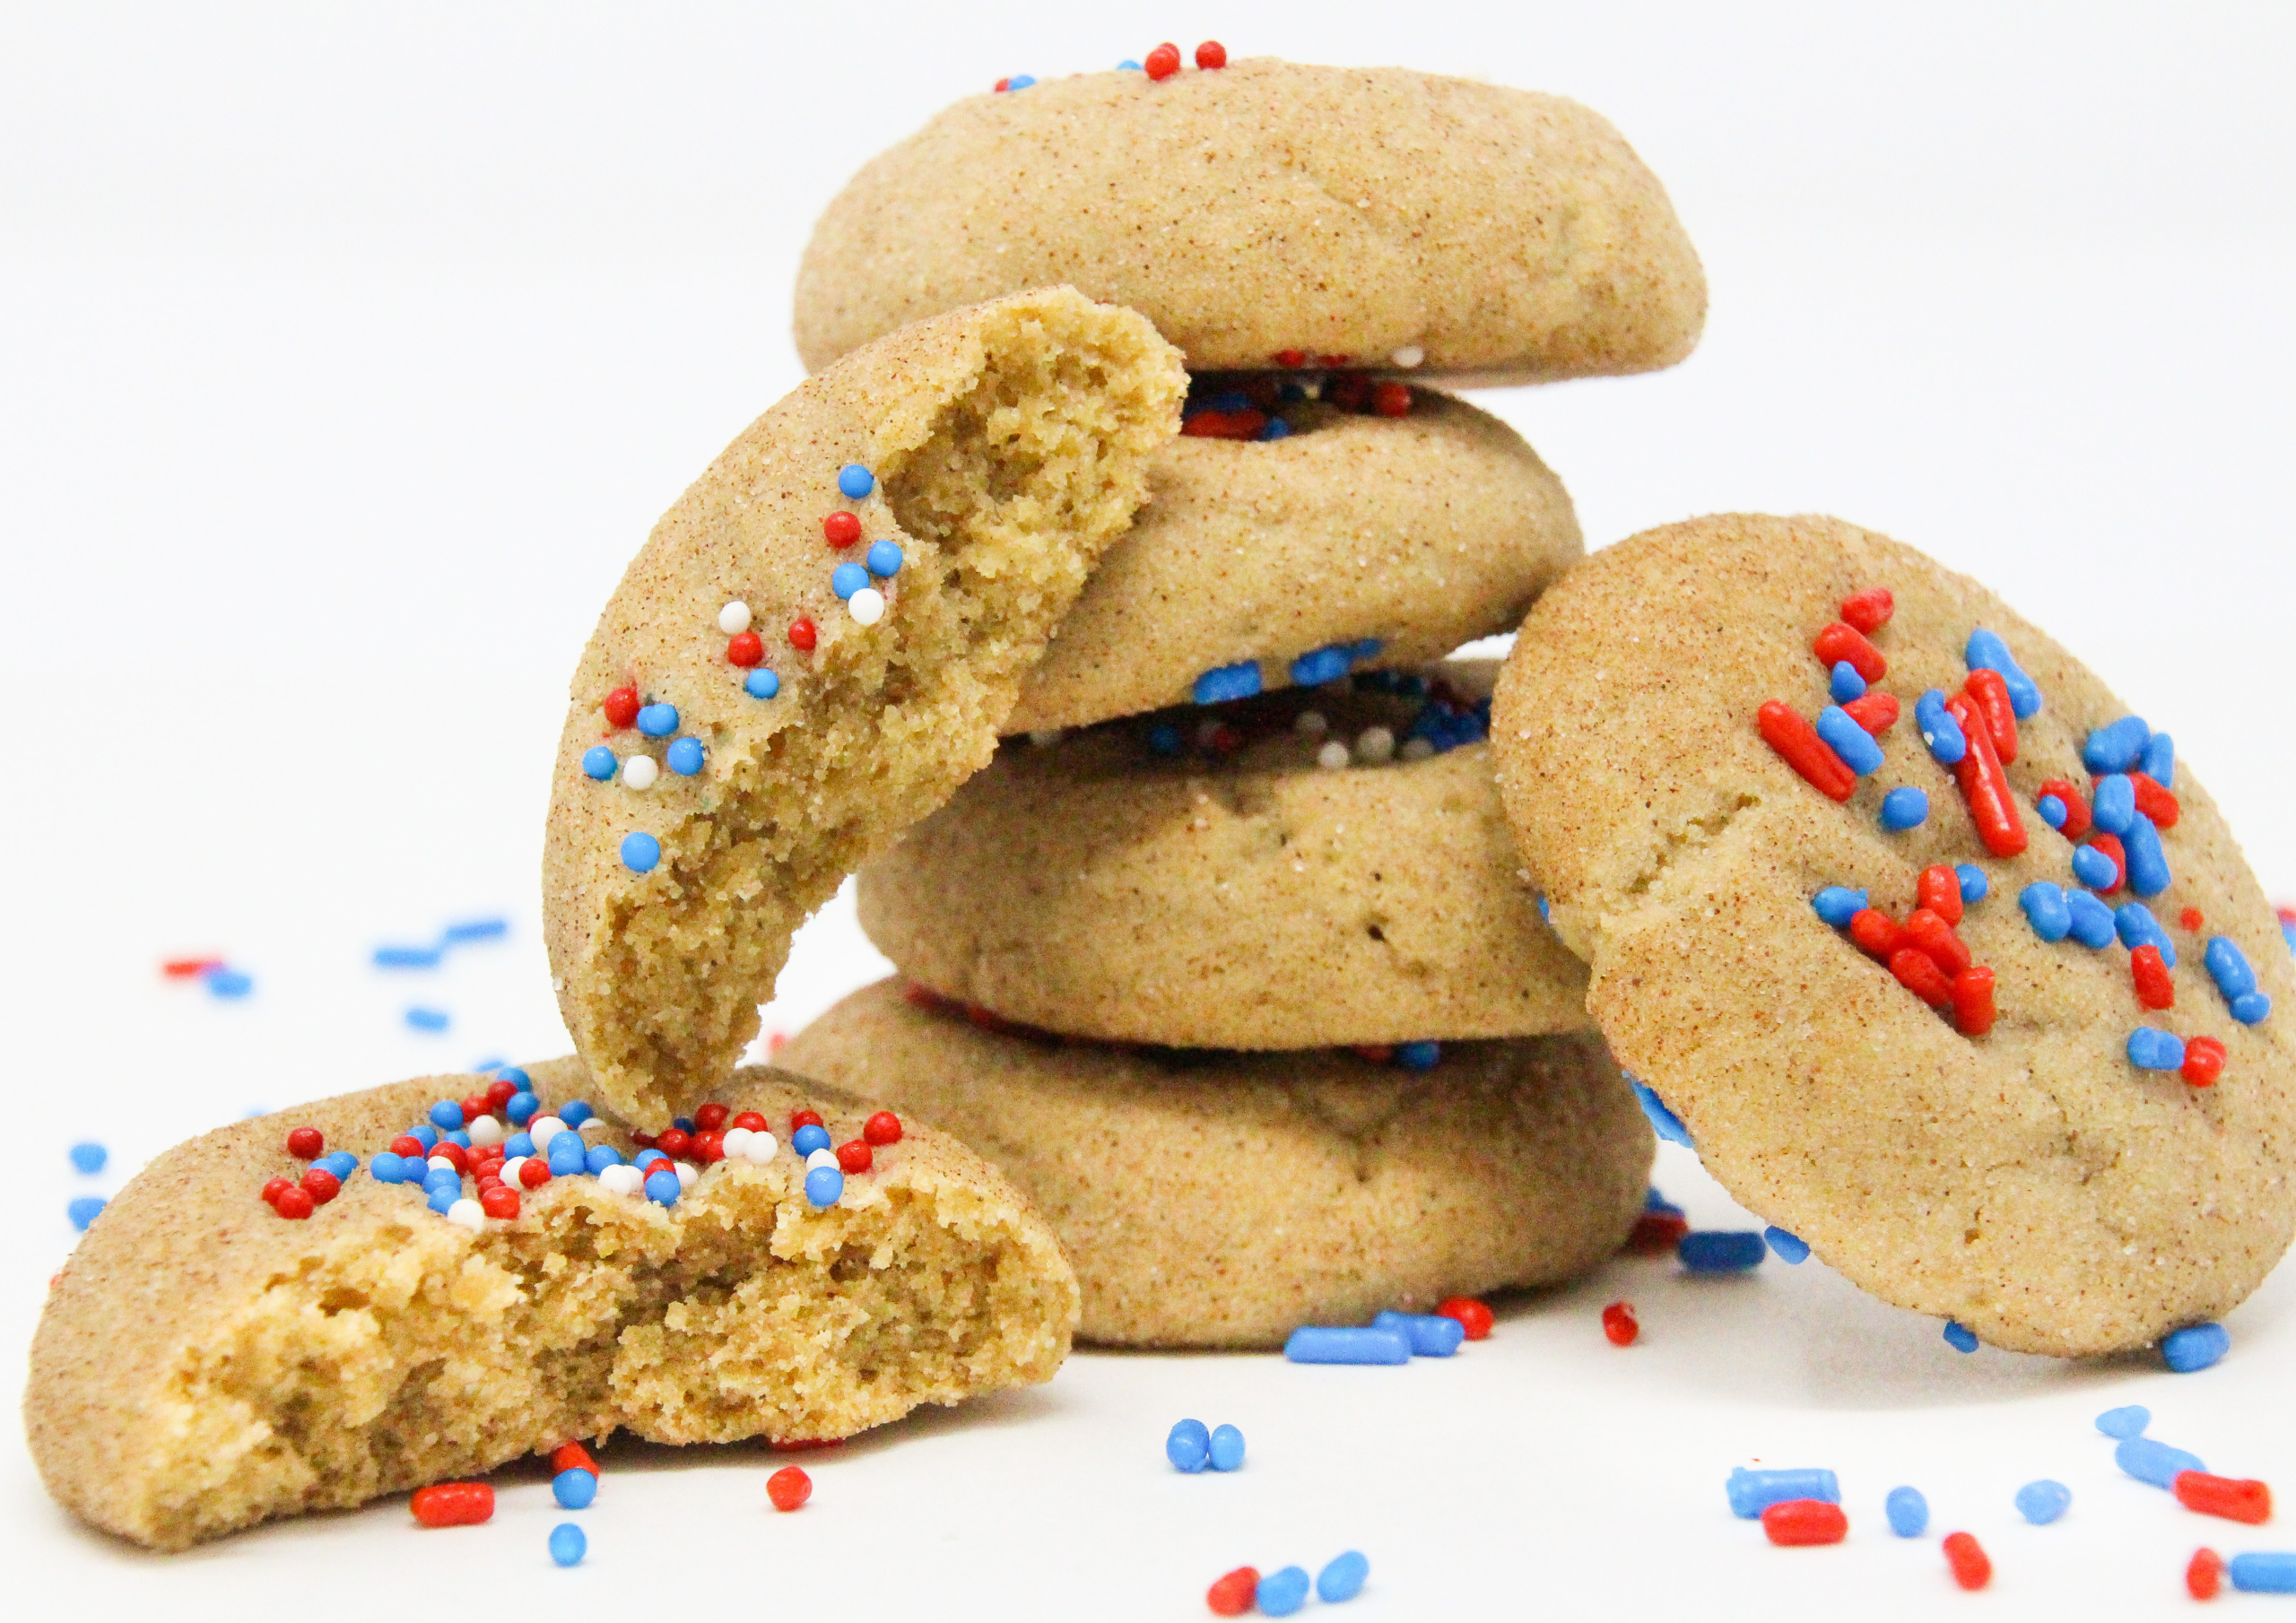 Basically snickerdoodles, the addition of colorful, patriotic sprinkles earns them the name of Yankerdoodles. With the addition of brown sugar to provide a deeper flavor, these soft, childhood favorite cookies will bring back wonderful memories and create new memories with your own family. Recipe shared with permission granted by Maddie Day, author of BATTER OFF DEAD. 